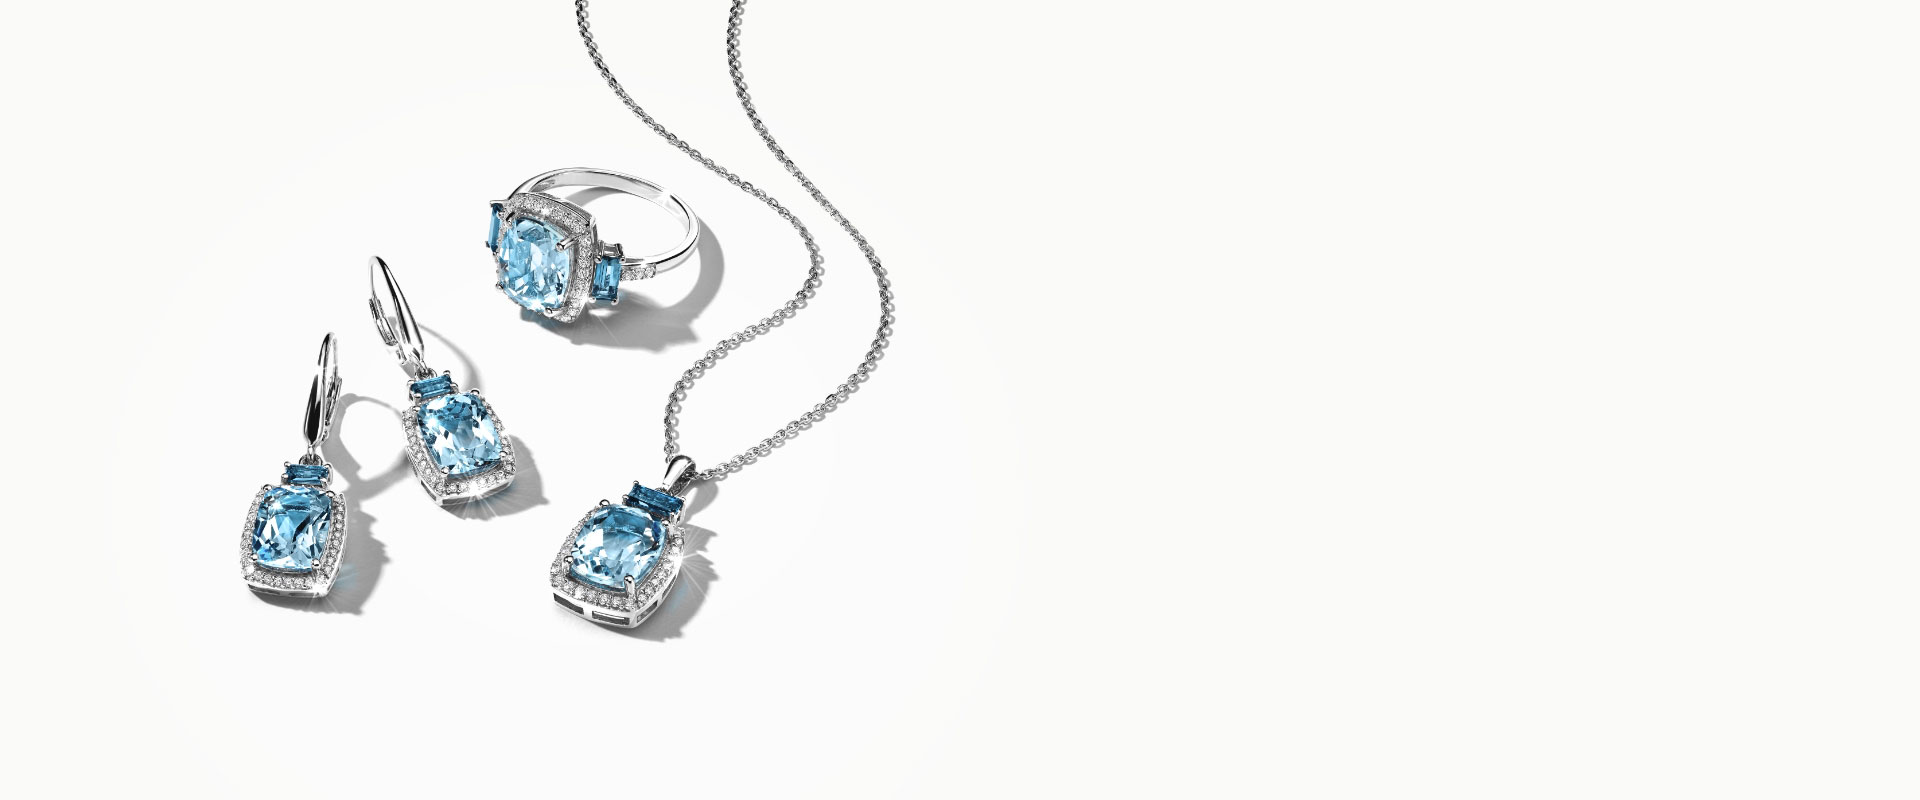 Blue topaz ring, earrings and necklace. Shop all gemstone jewelry at Jared.